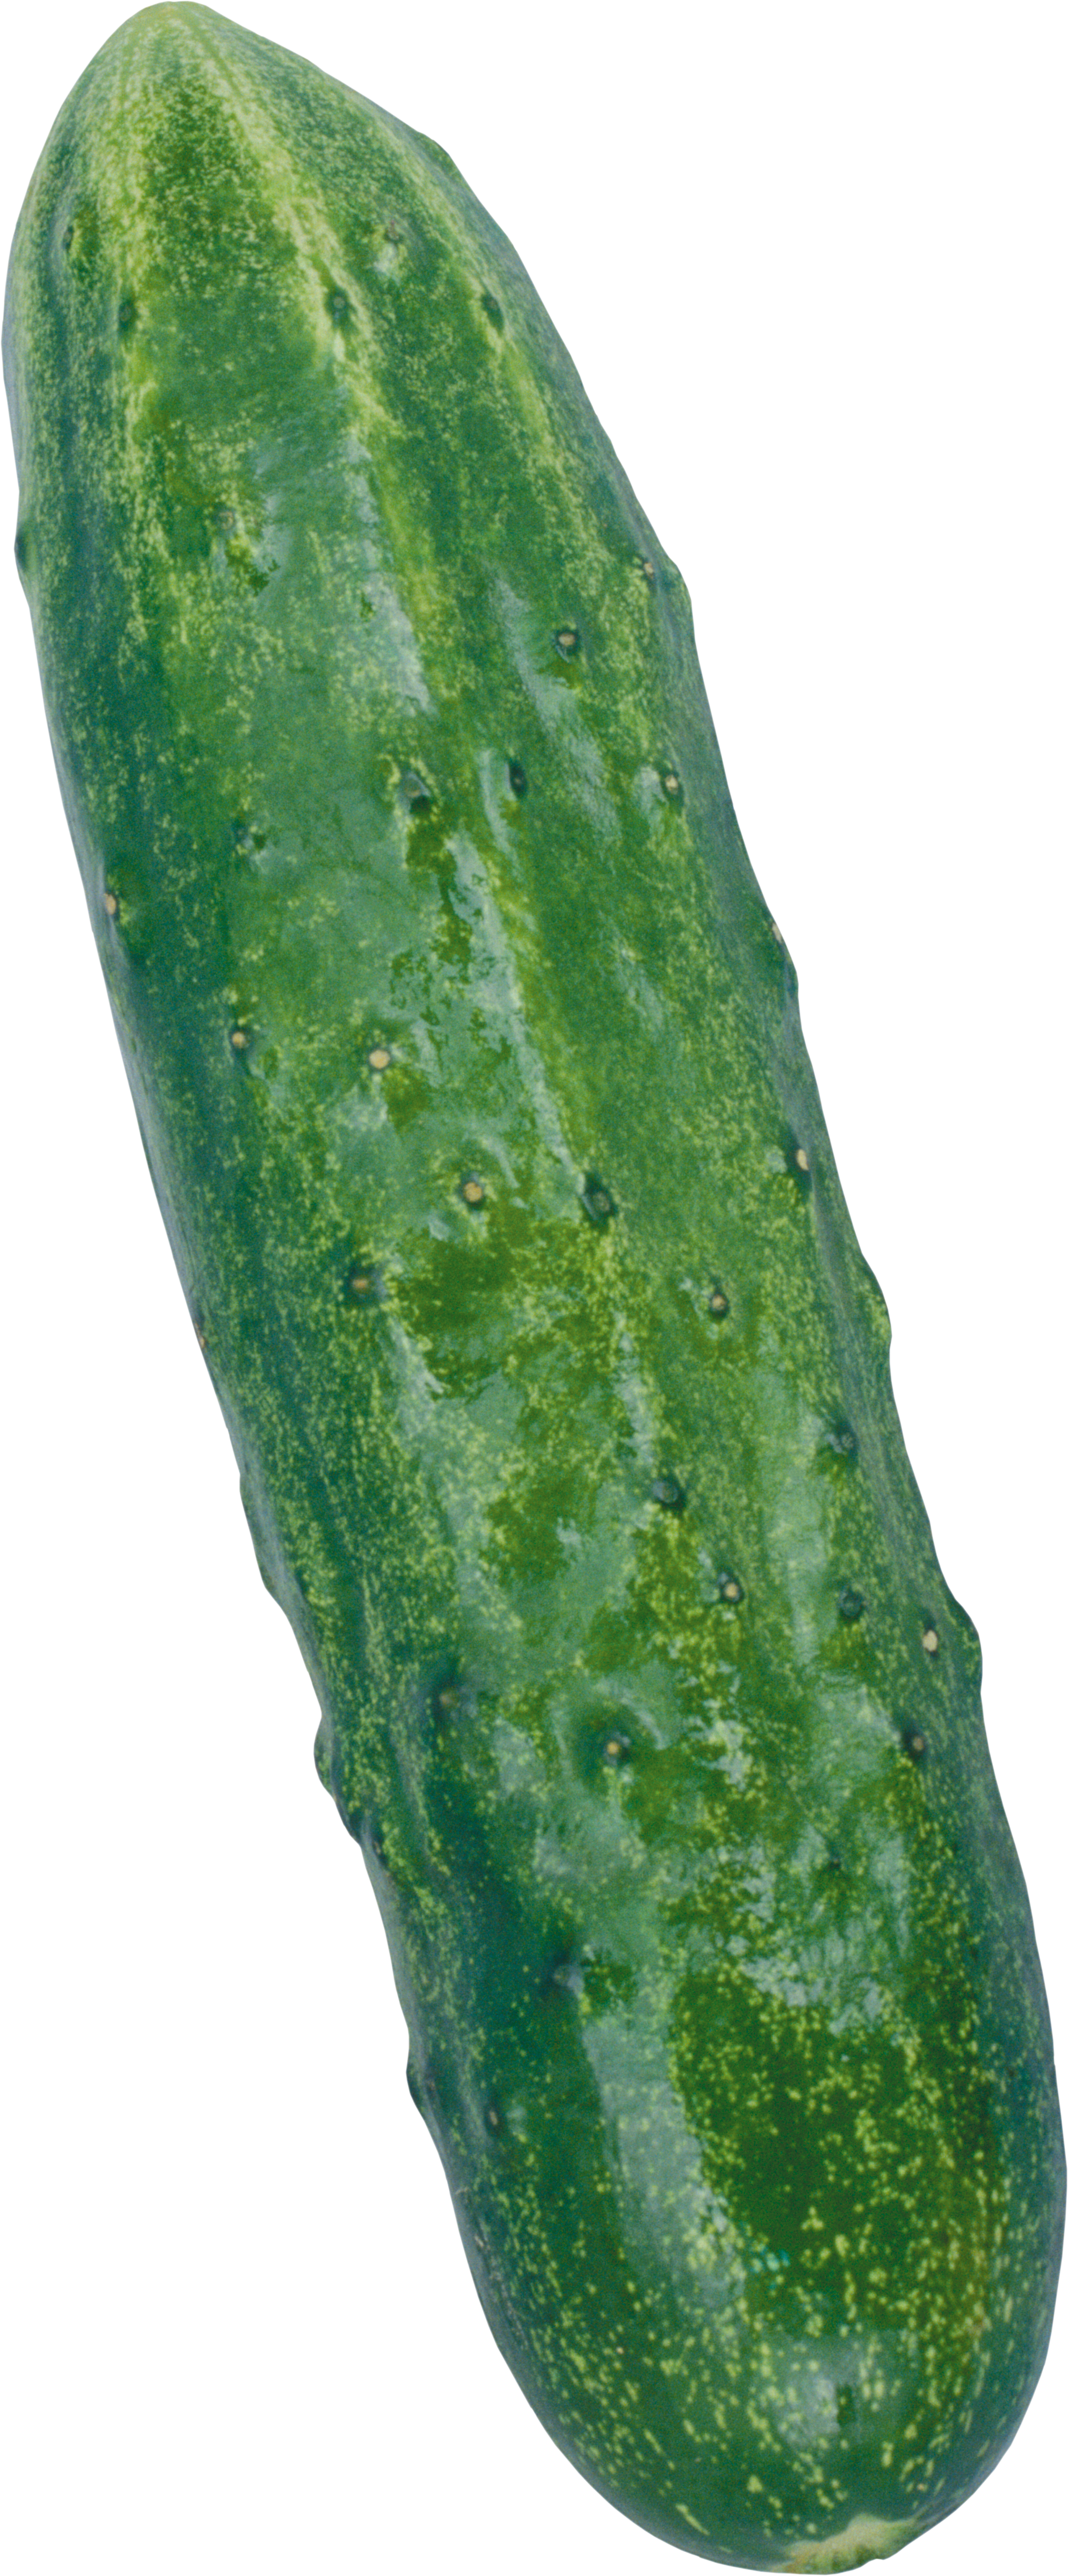 Long cucumber PNG with transparent background